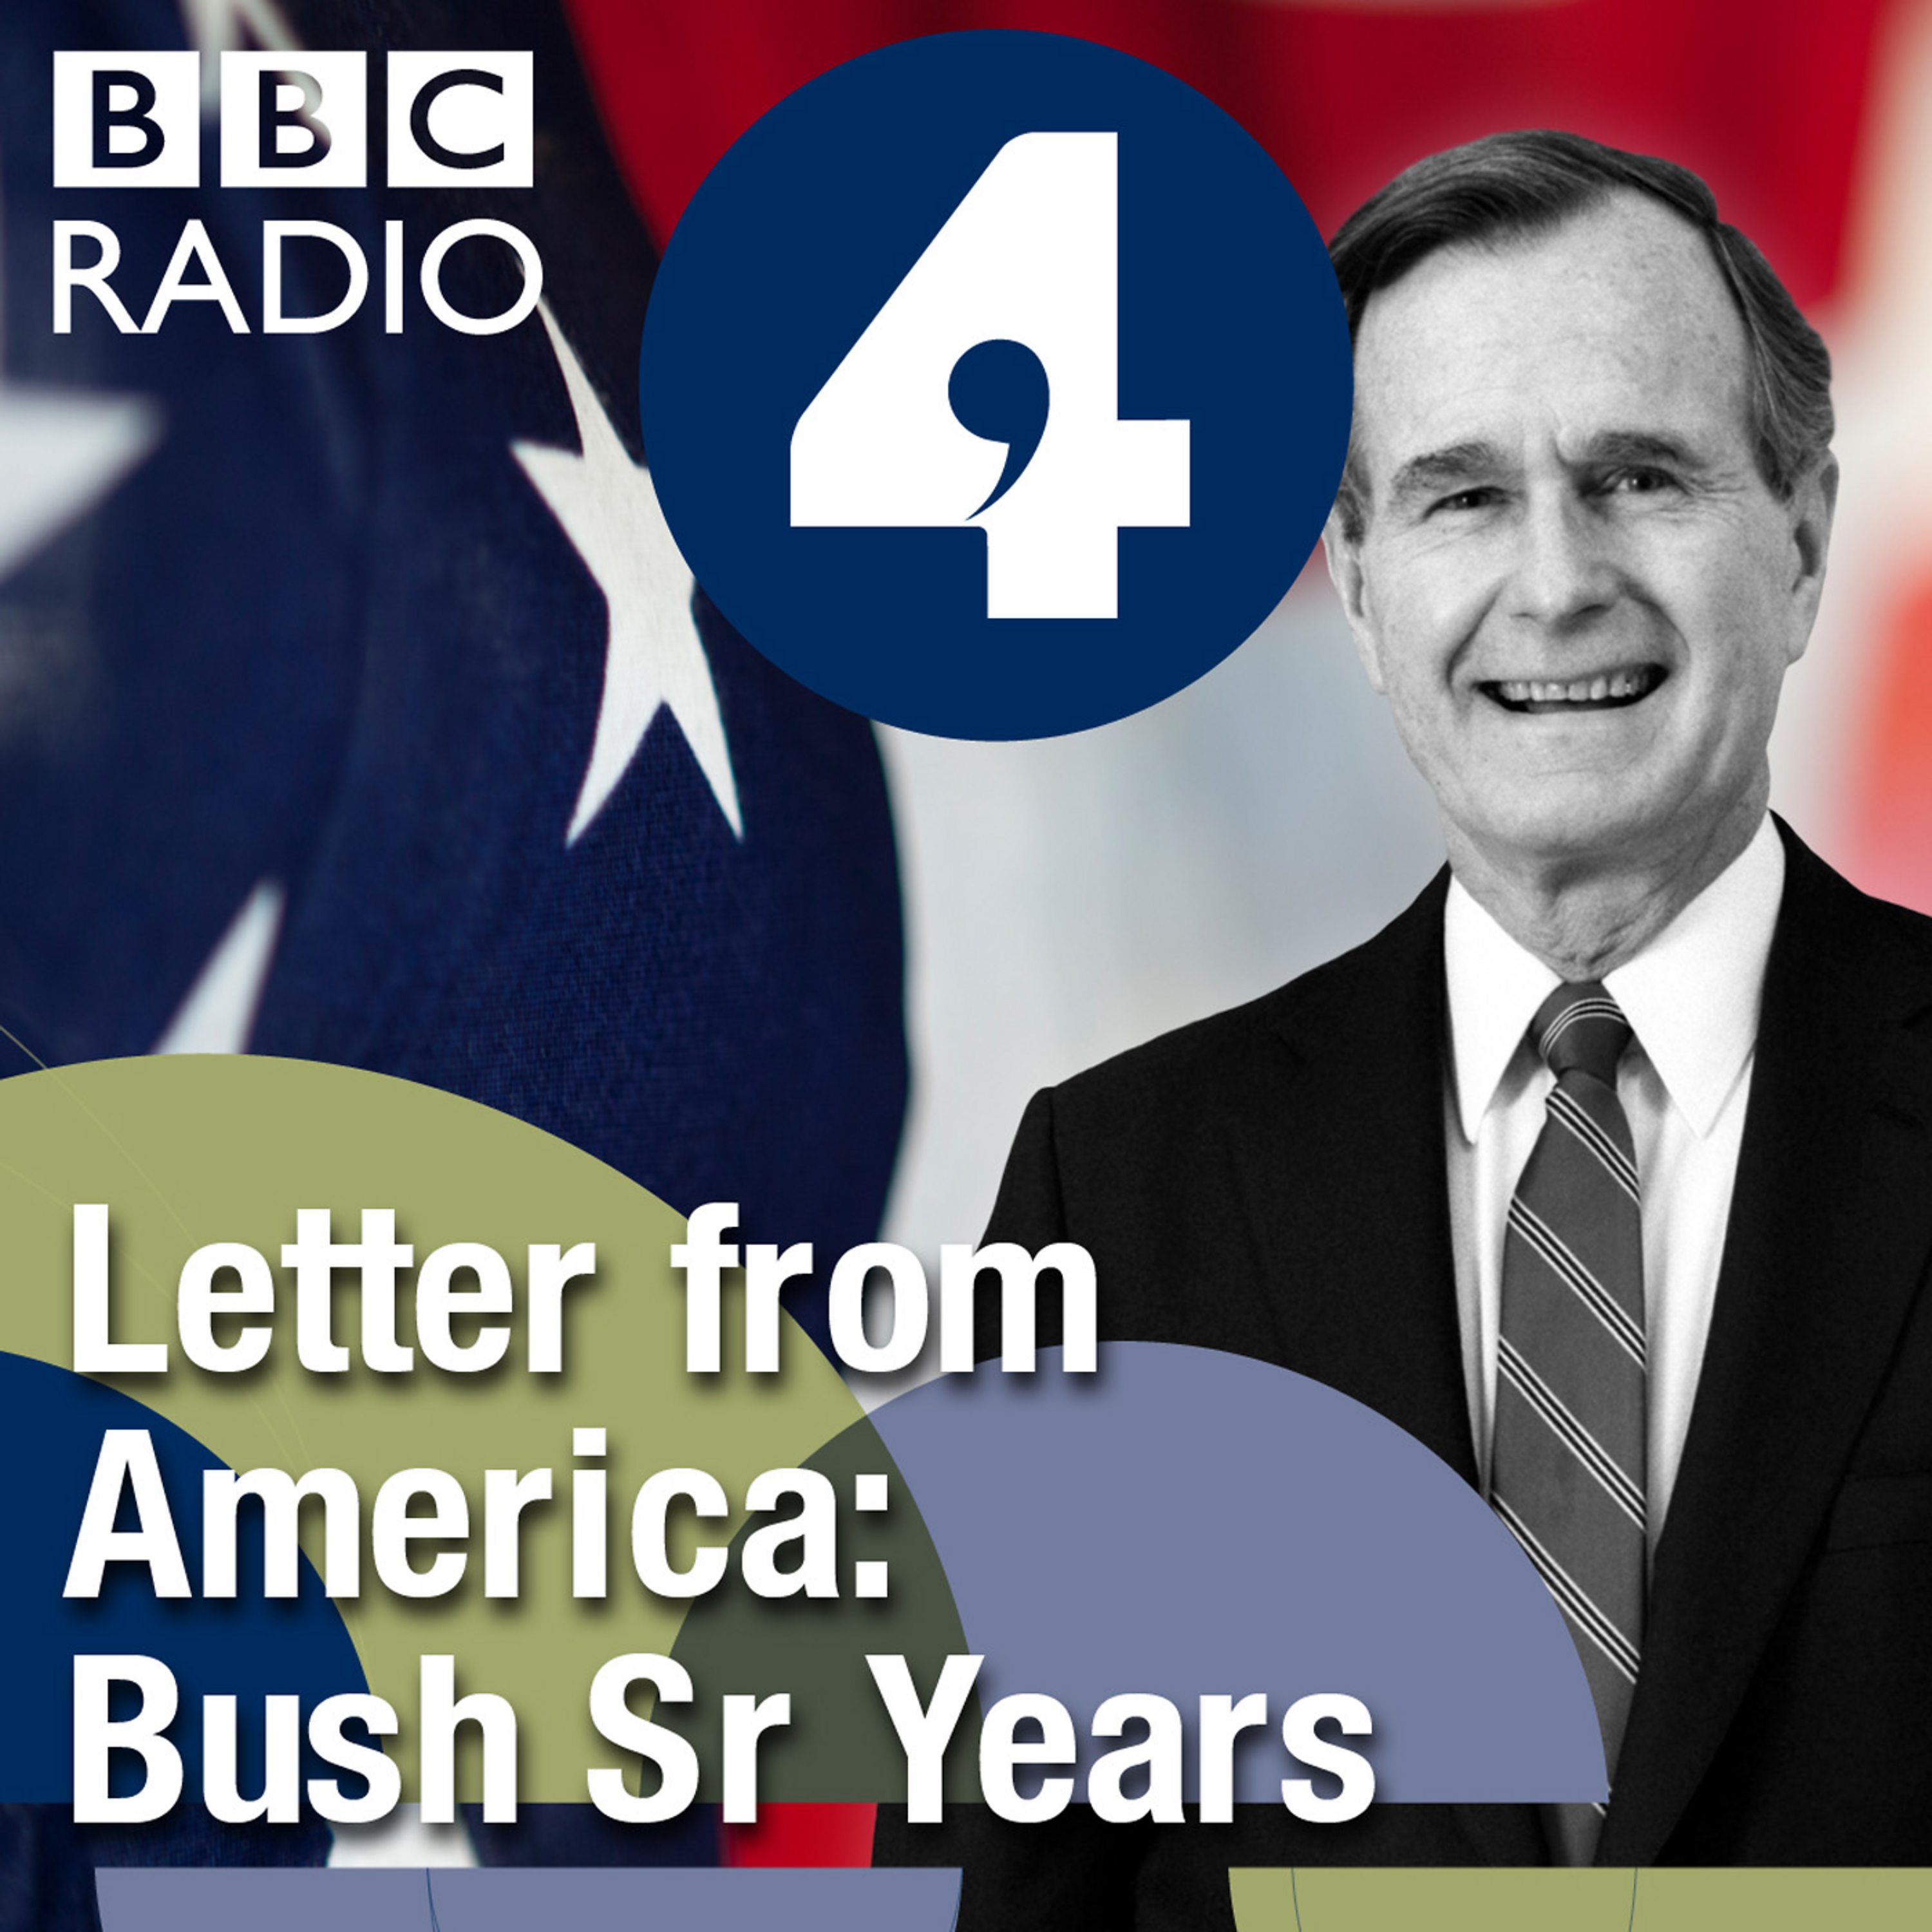 Letter from America by Alistair Cooke: The Bush Sr Years (1989-1992)